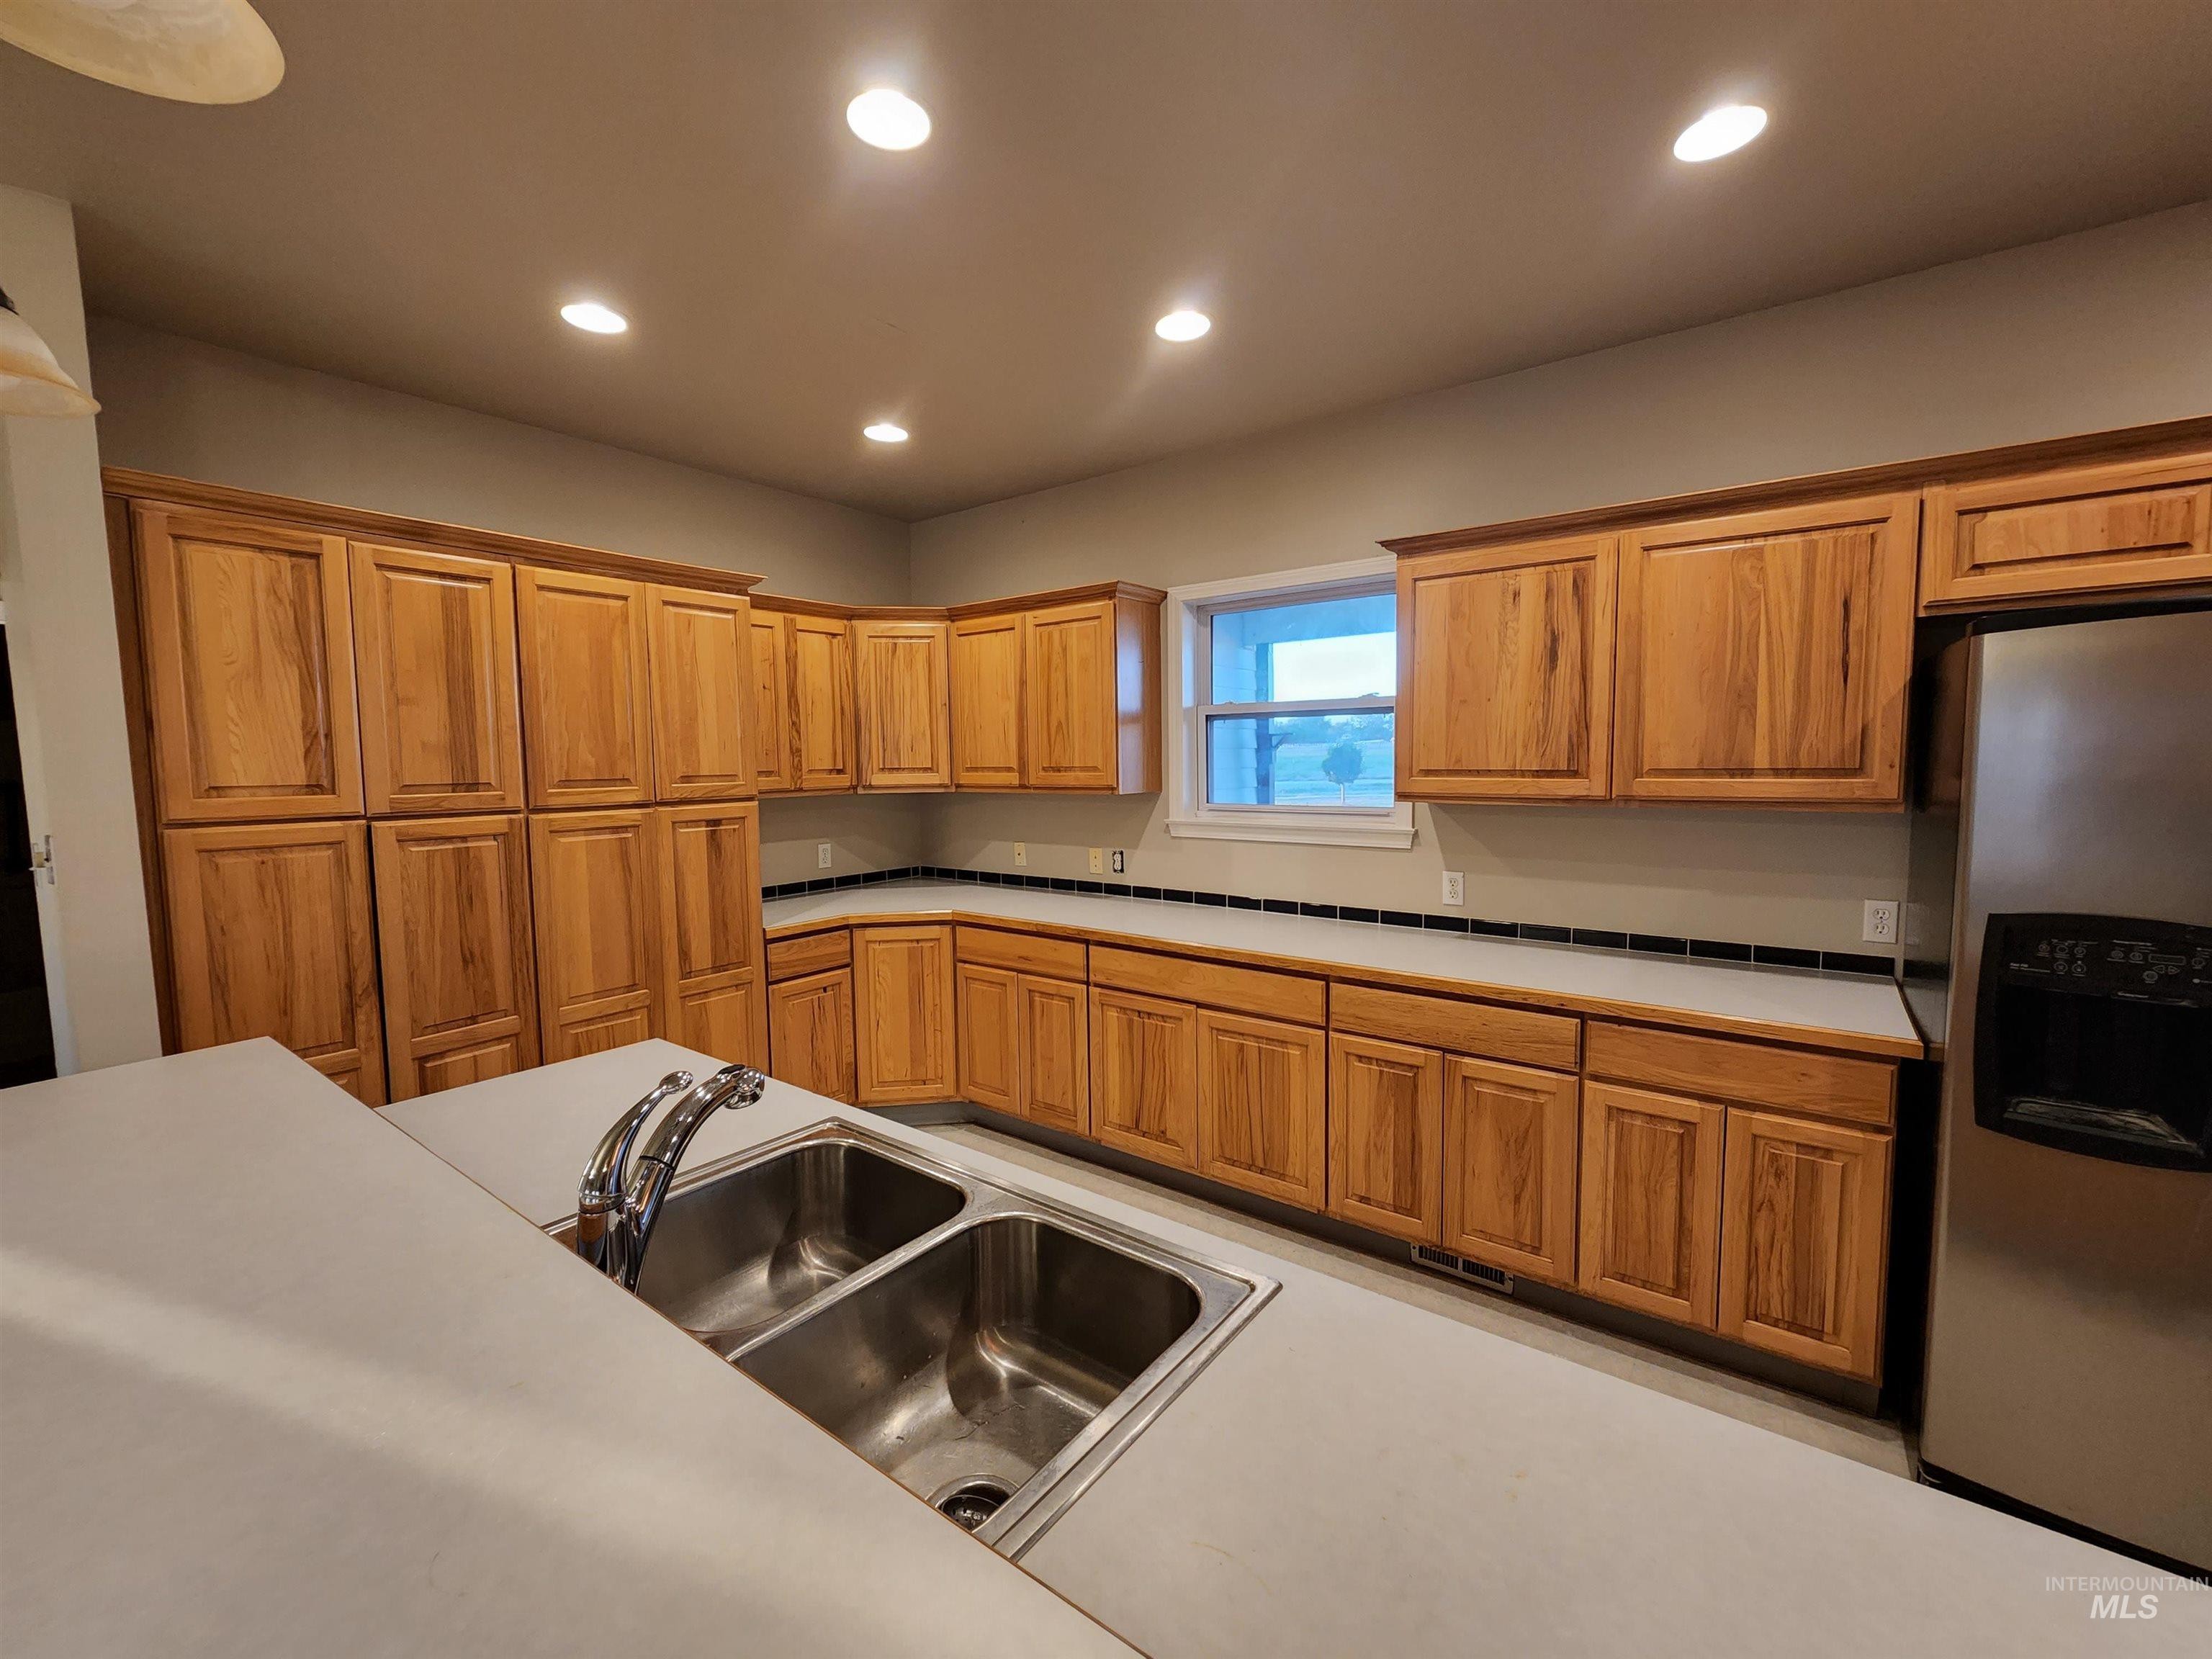 5787 Guido Ln., Nampa, Idaho, 83687, United States, 3 Bedrooms Bedrooms, ,2 BathroomsBathrooms,Residential,For Sale,5787 Guido Ln.,1434740